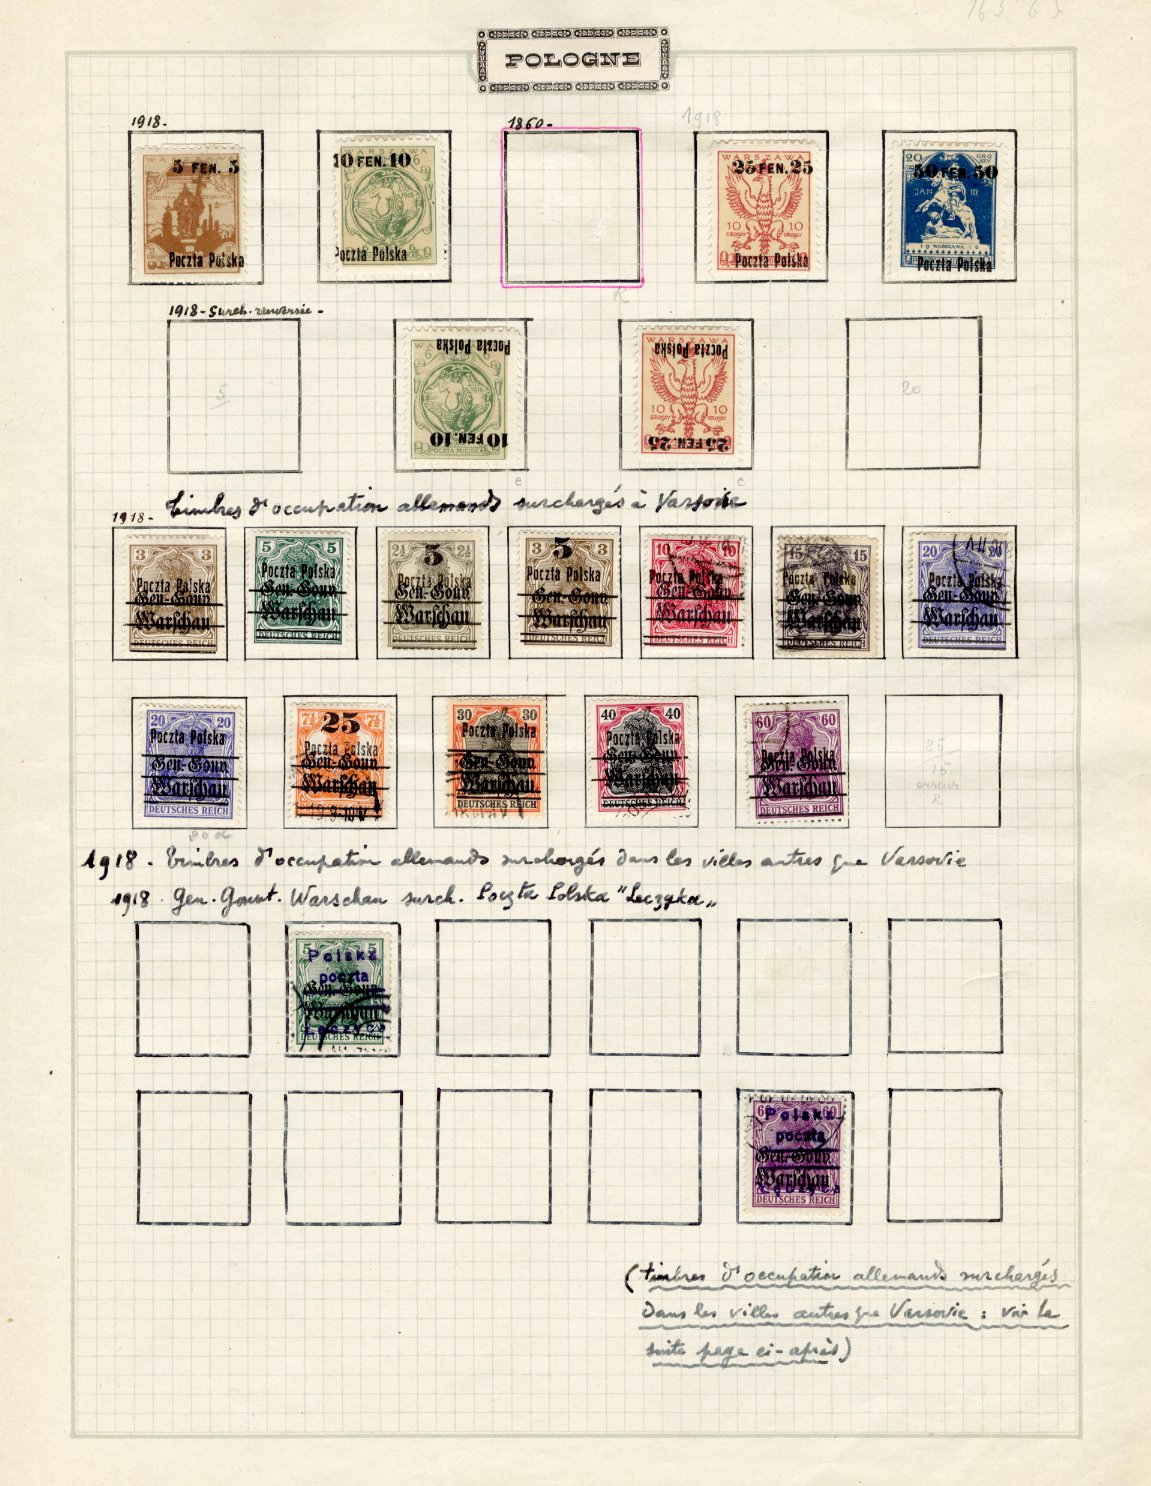 Lot 1509 - LARGE LOTS AND COLLECTIONS YEMEN  -  Cherrystone Auctions U.S. & Worldwide Stamps & Postal History